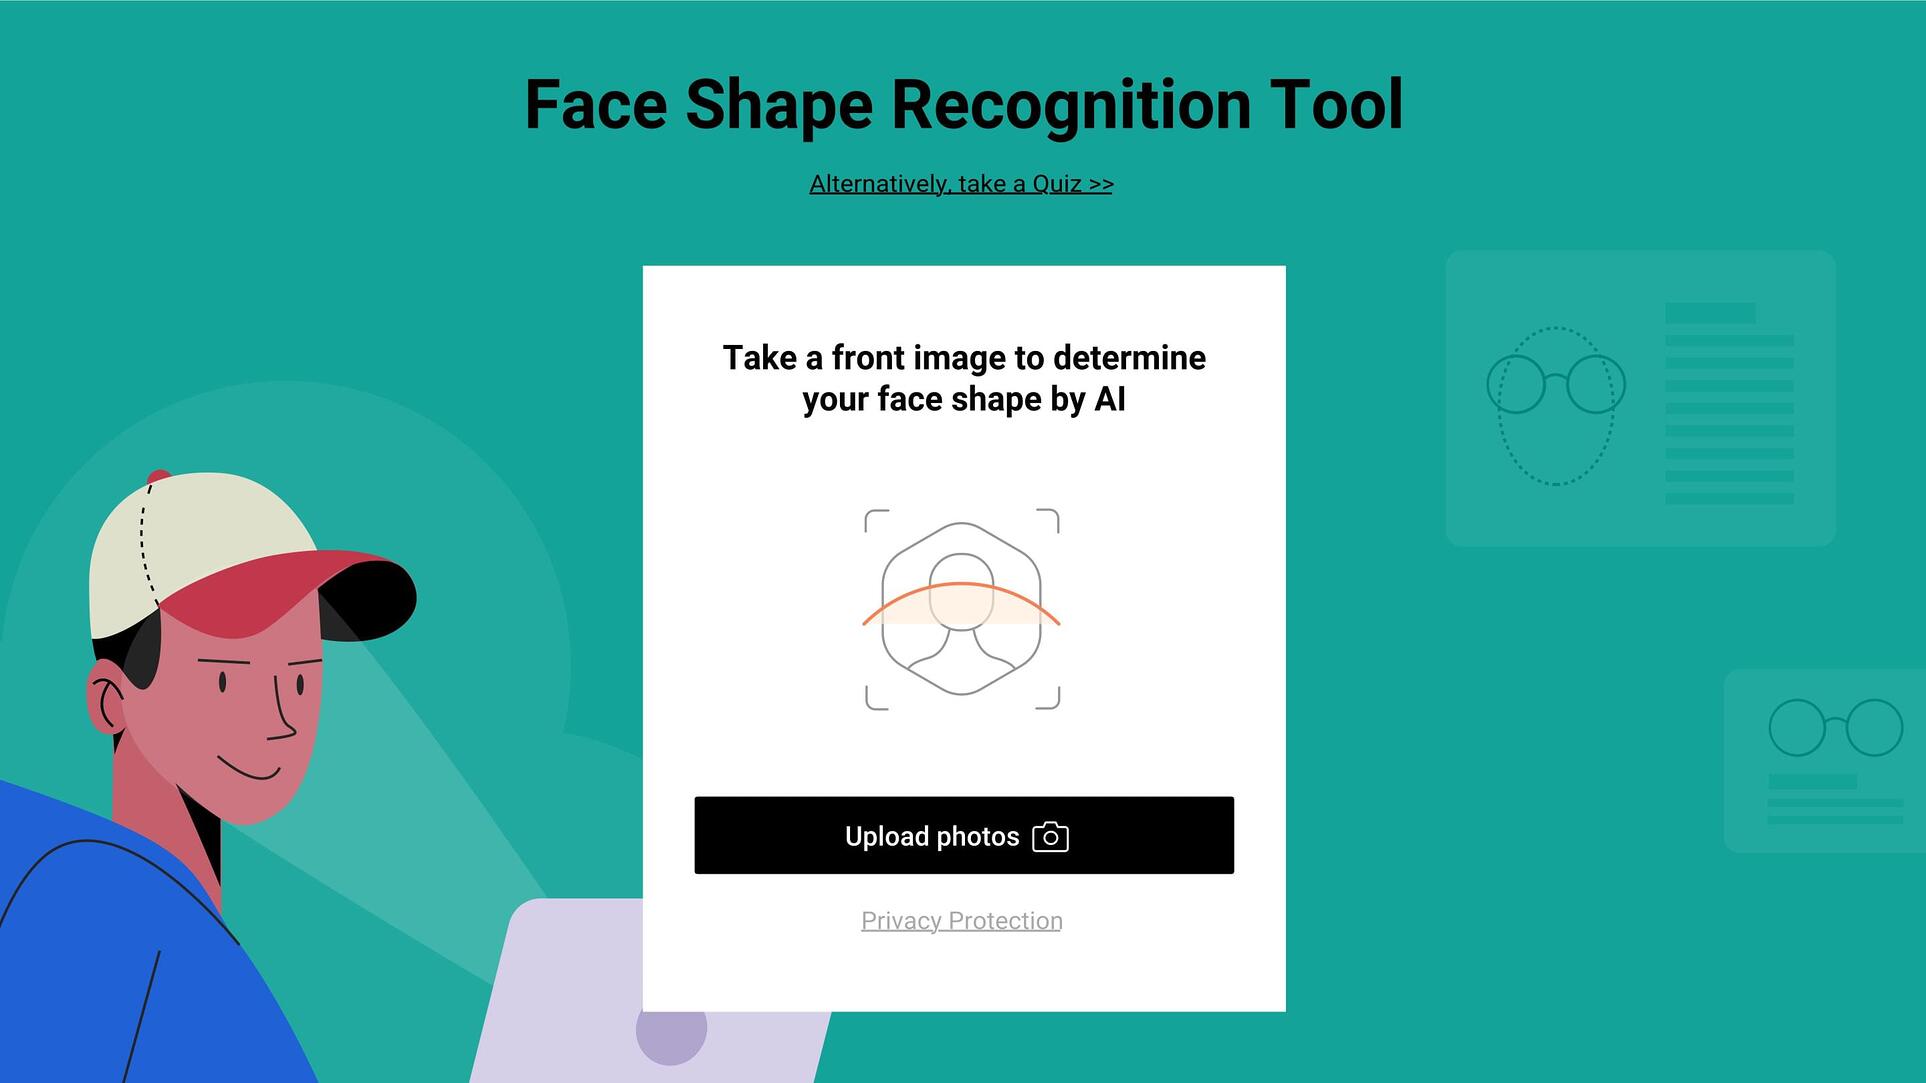 You might consider finding your face shape to get started.